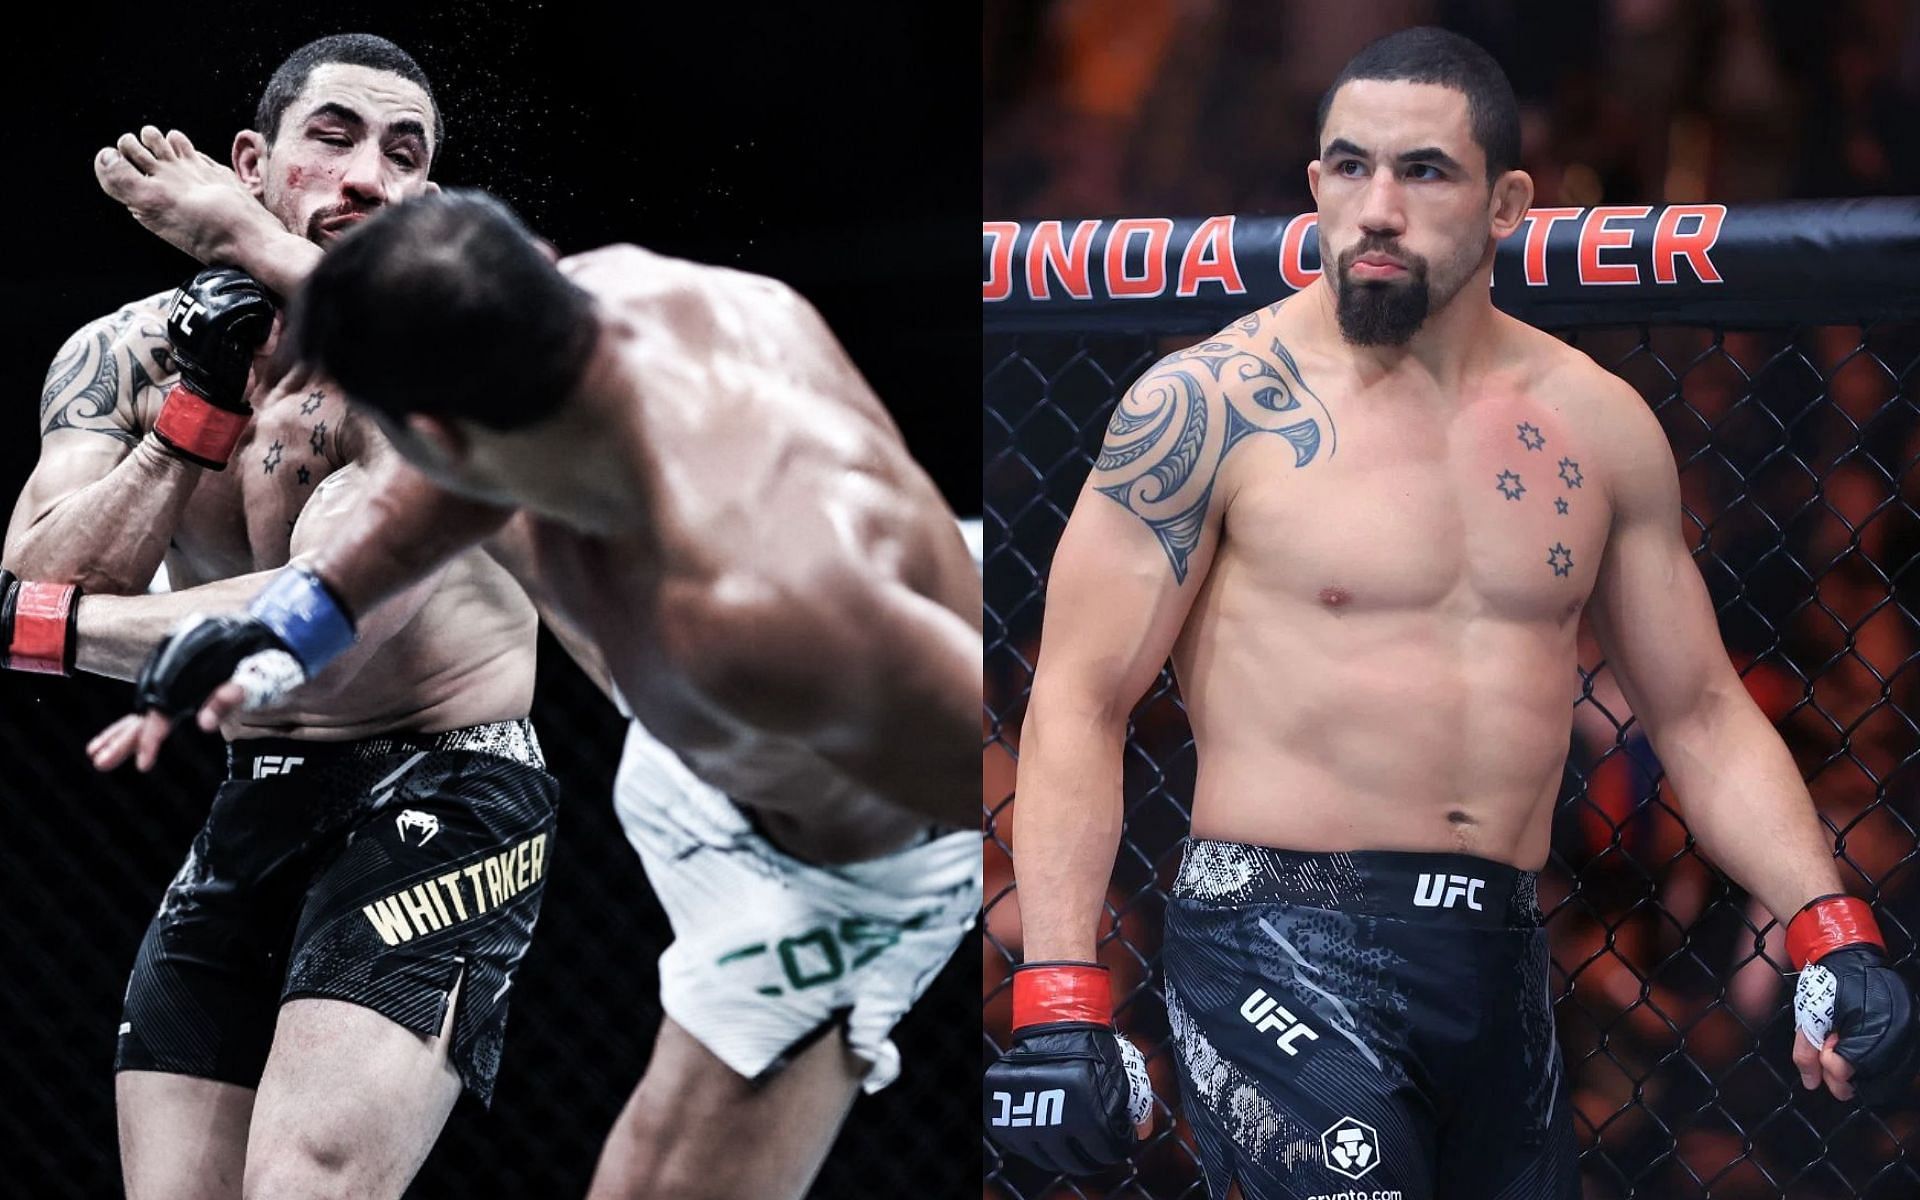 Robert Whittaker (right) looks back at his war with Paulo Costa (left) at UFC 298 [Images Courtesy: @GettyImages and @borrachinhamma on Instagram]